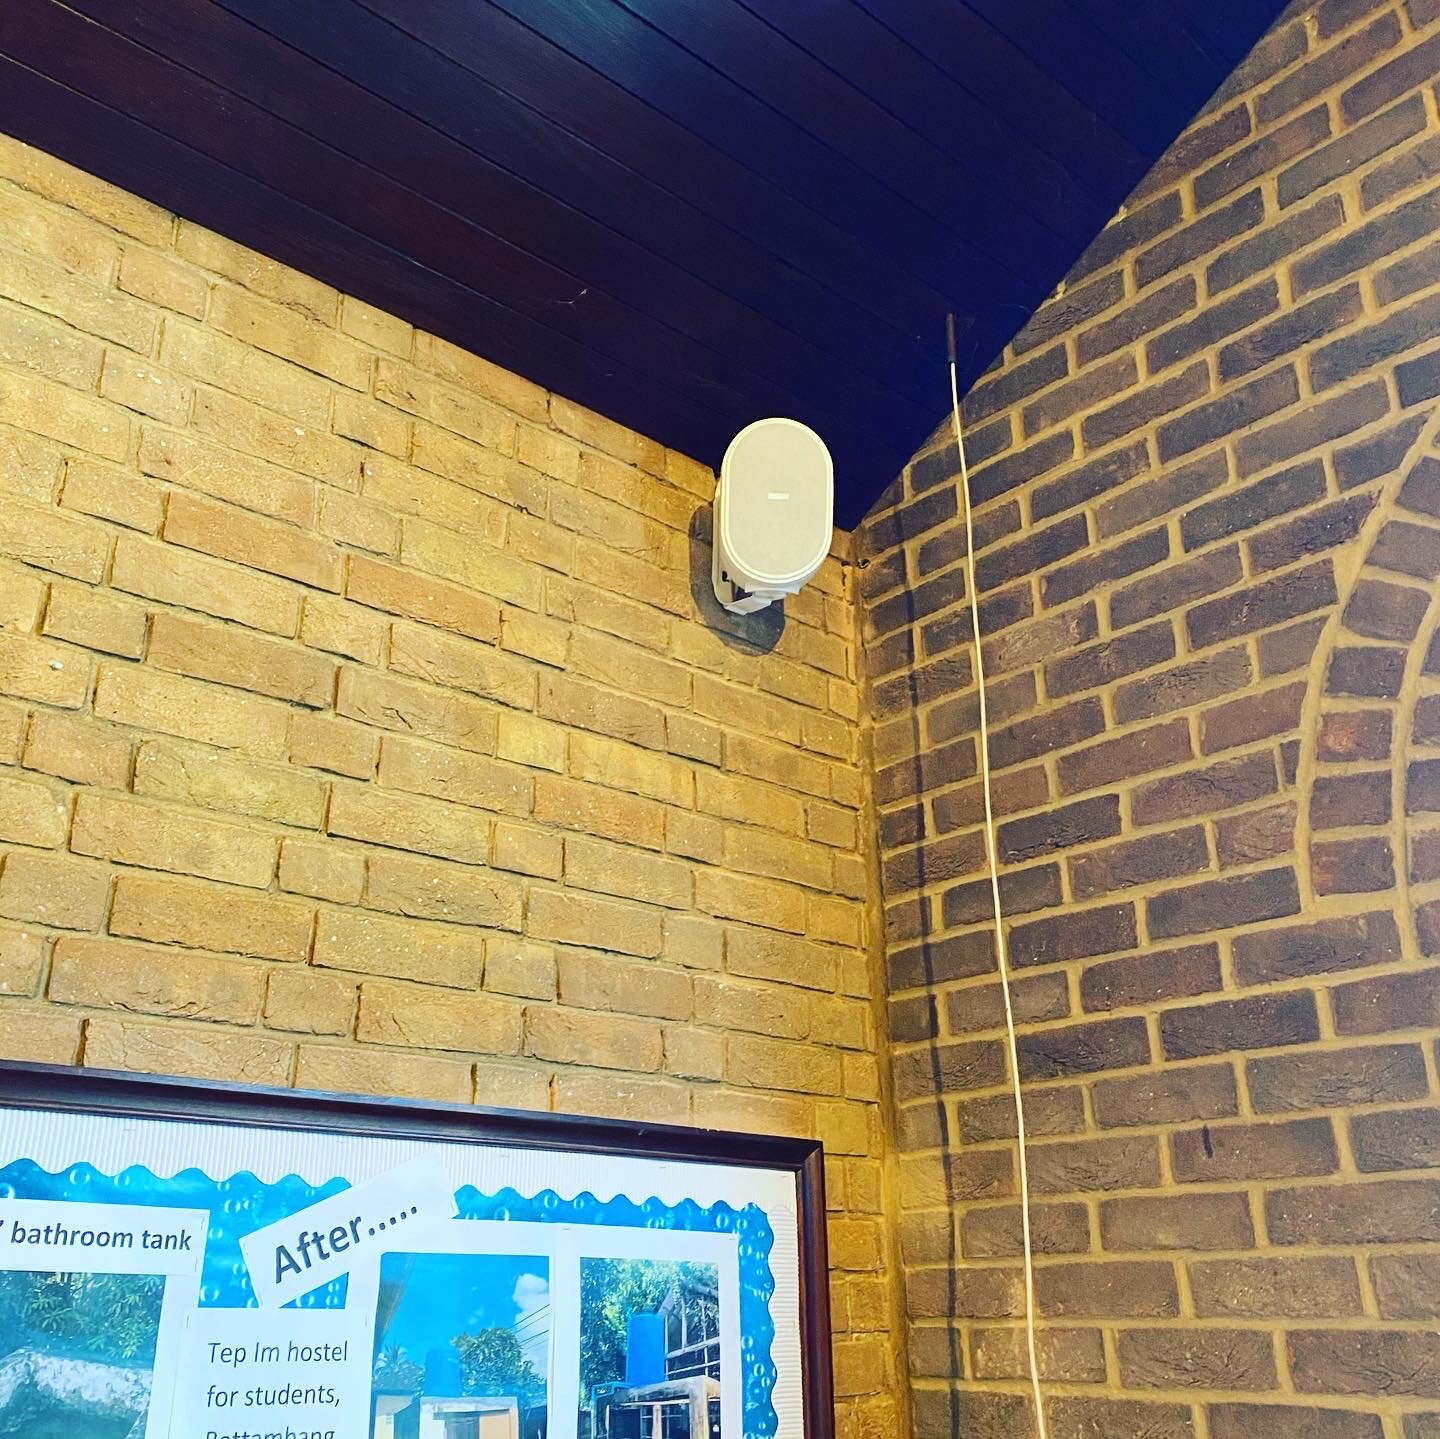 Close up of a speaker attached to the brick wall inside the church